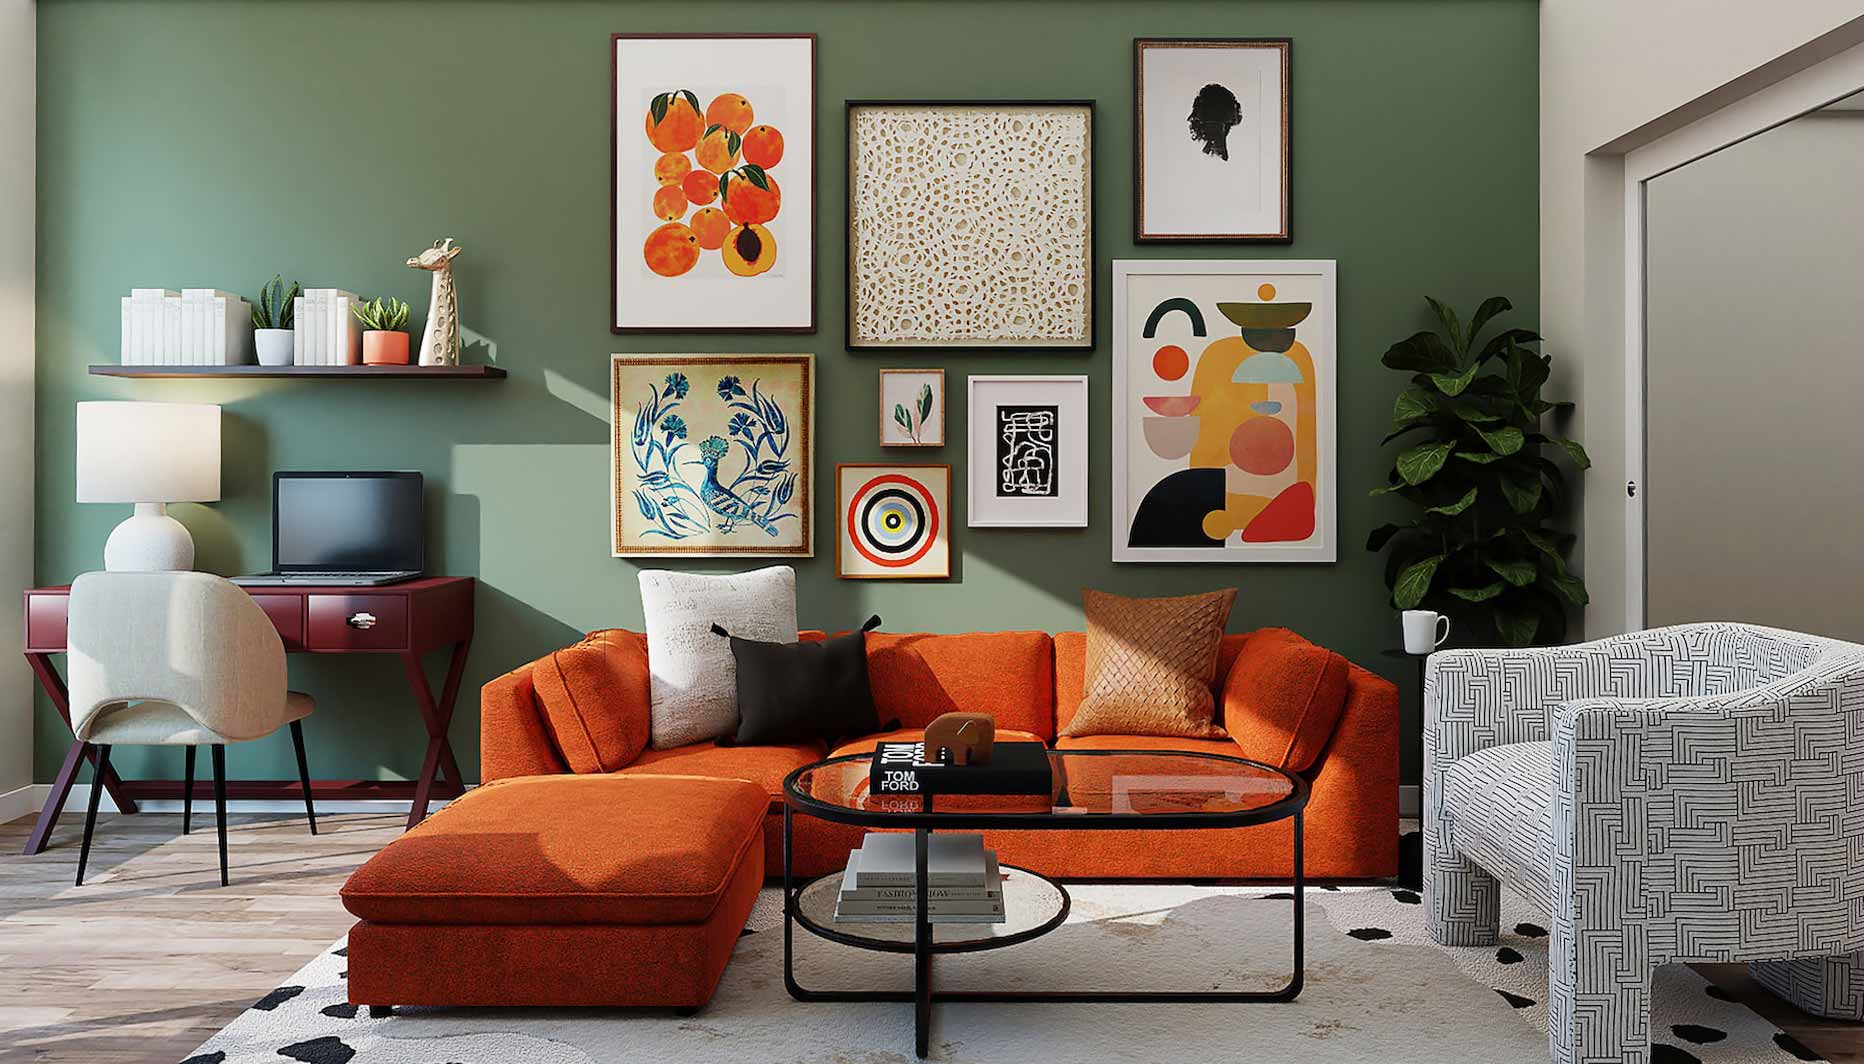 Spacious living room with a large orange sofa and many vibrant pictures on the wall